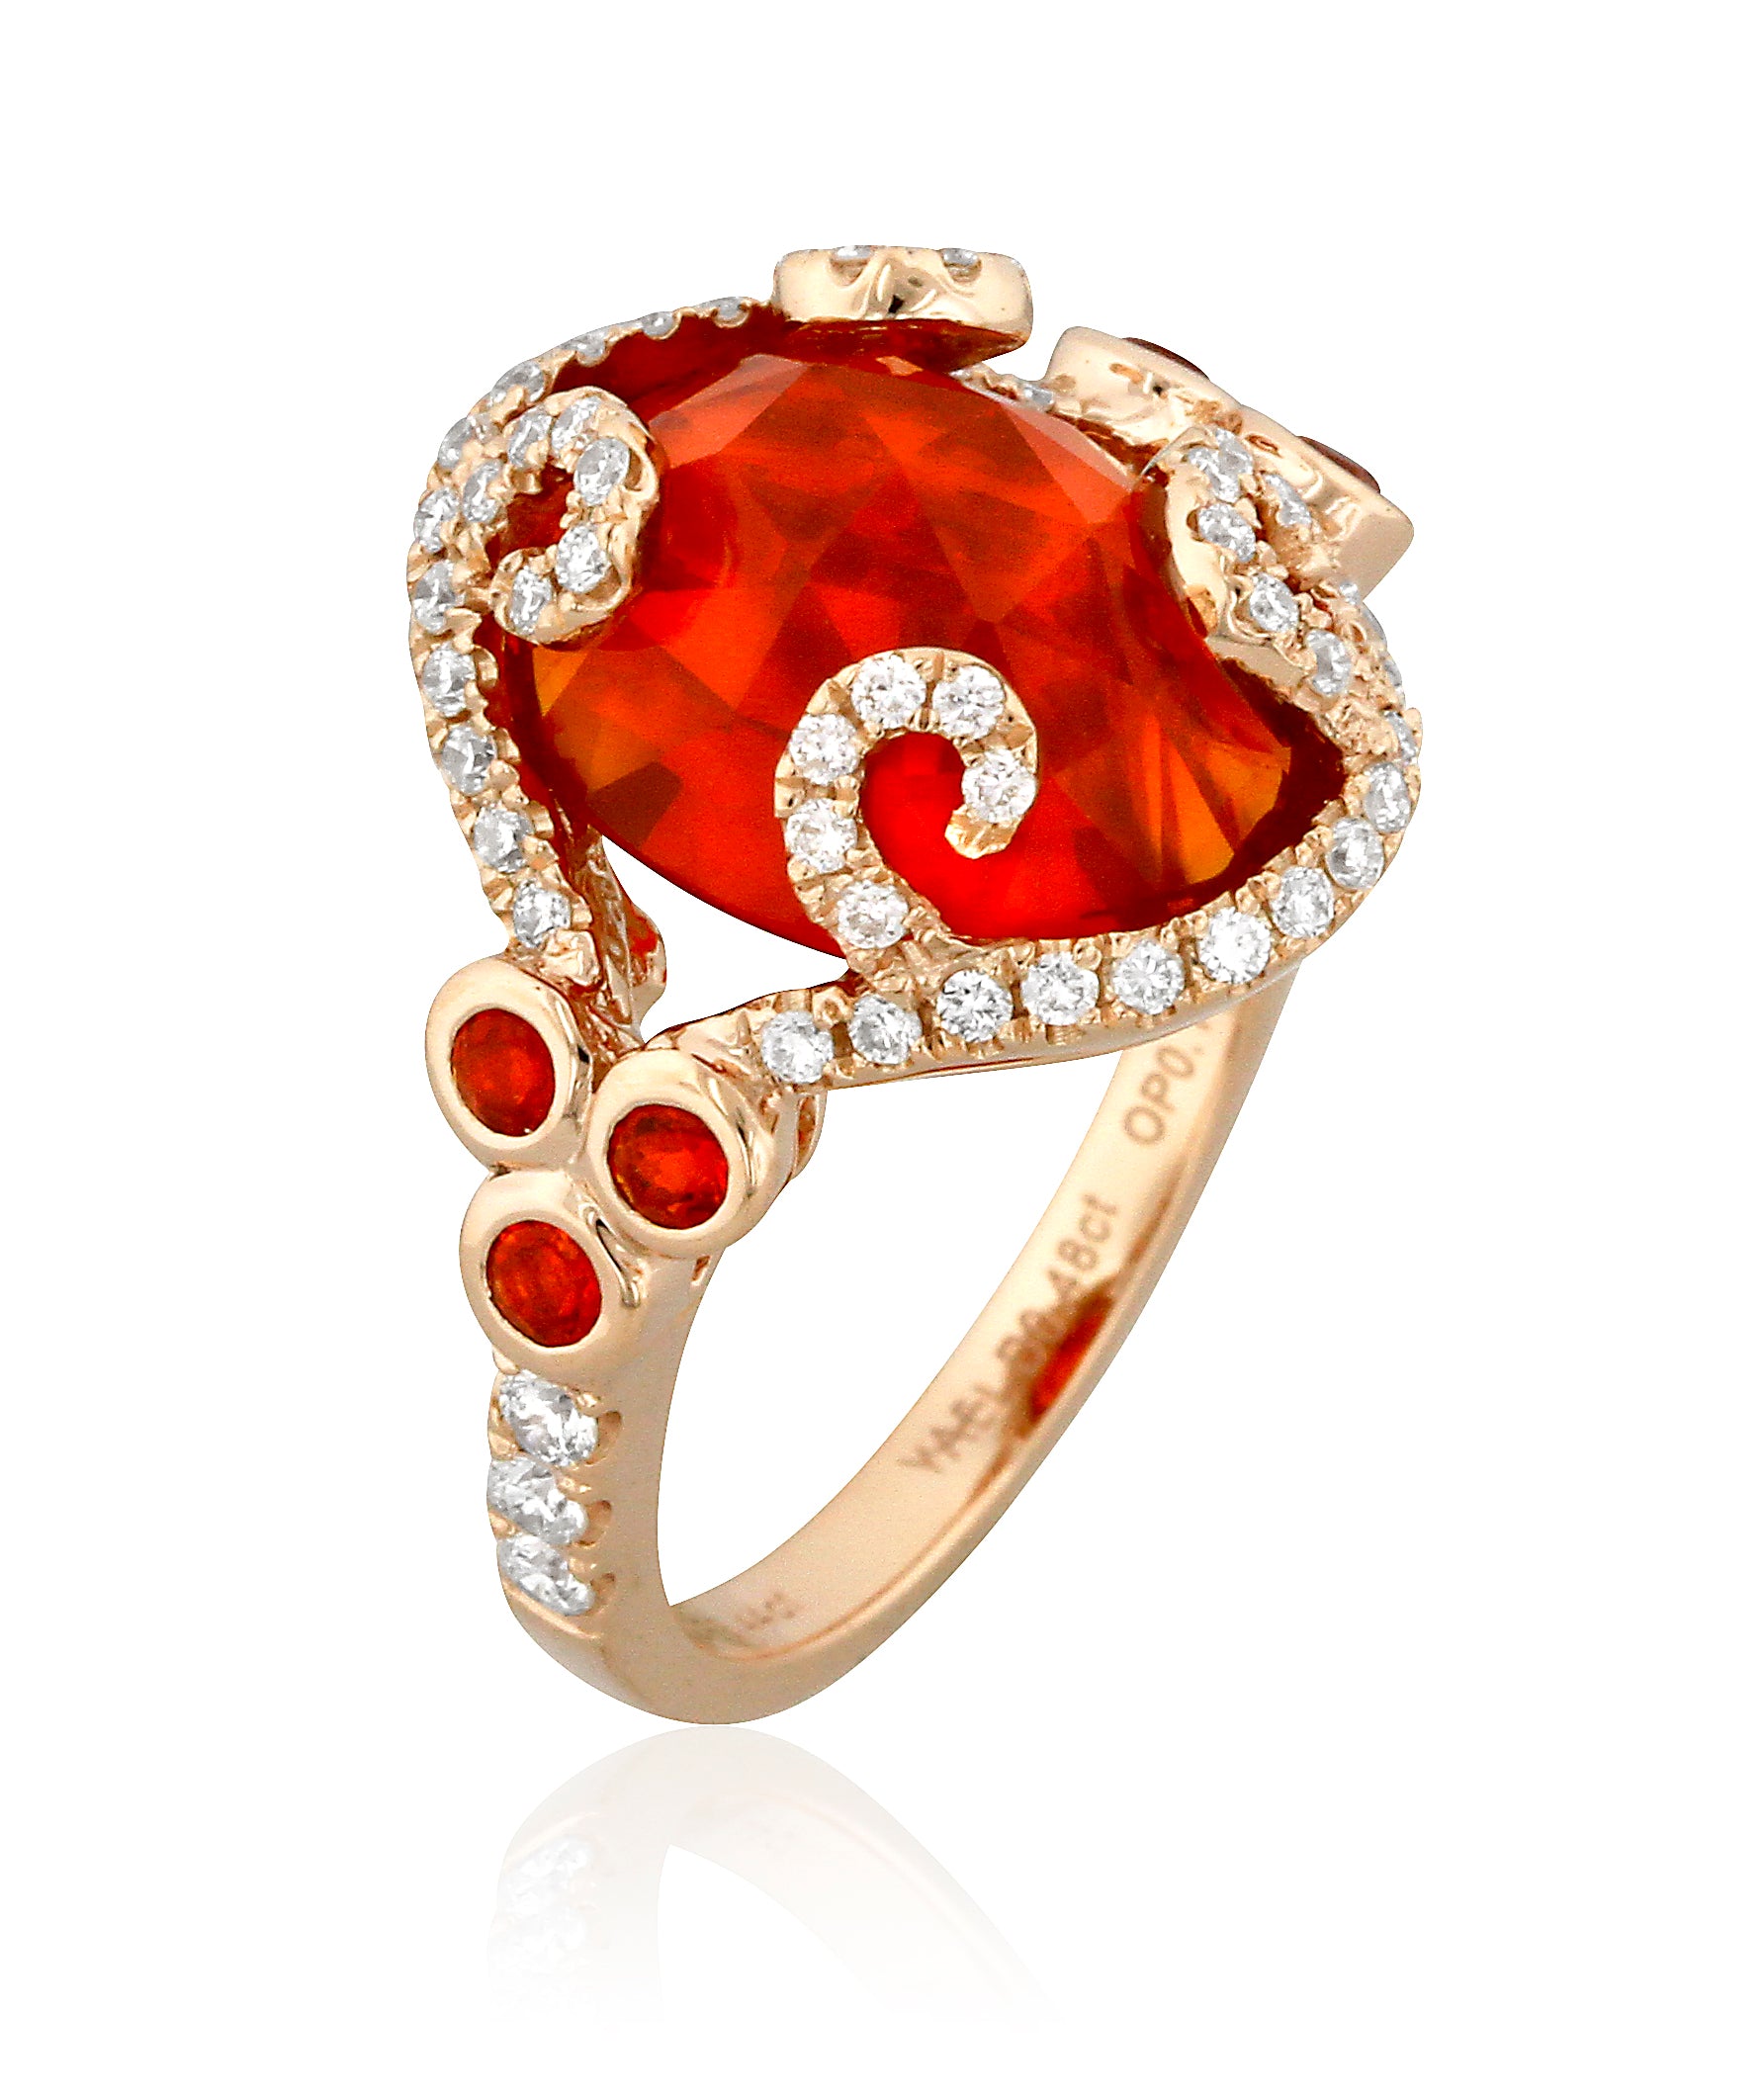 Fire Opal and Diamond Ring by Yael - Rose Gold - Talisman Collection Fine Jewelers